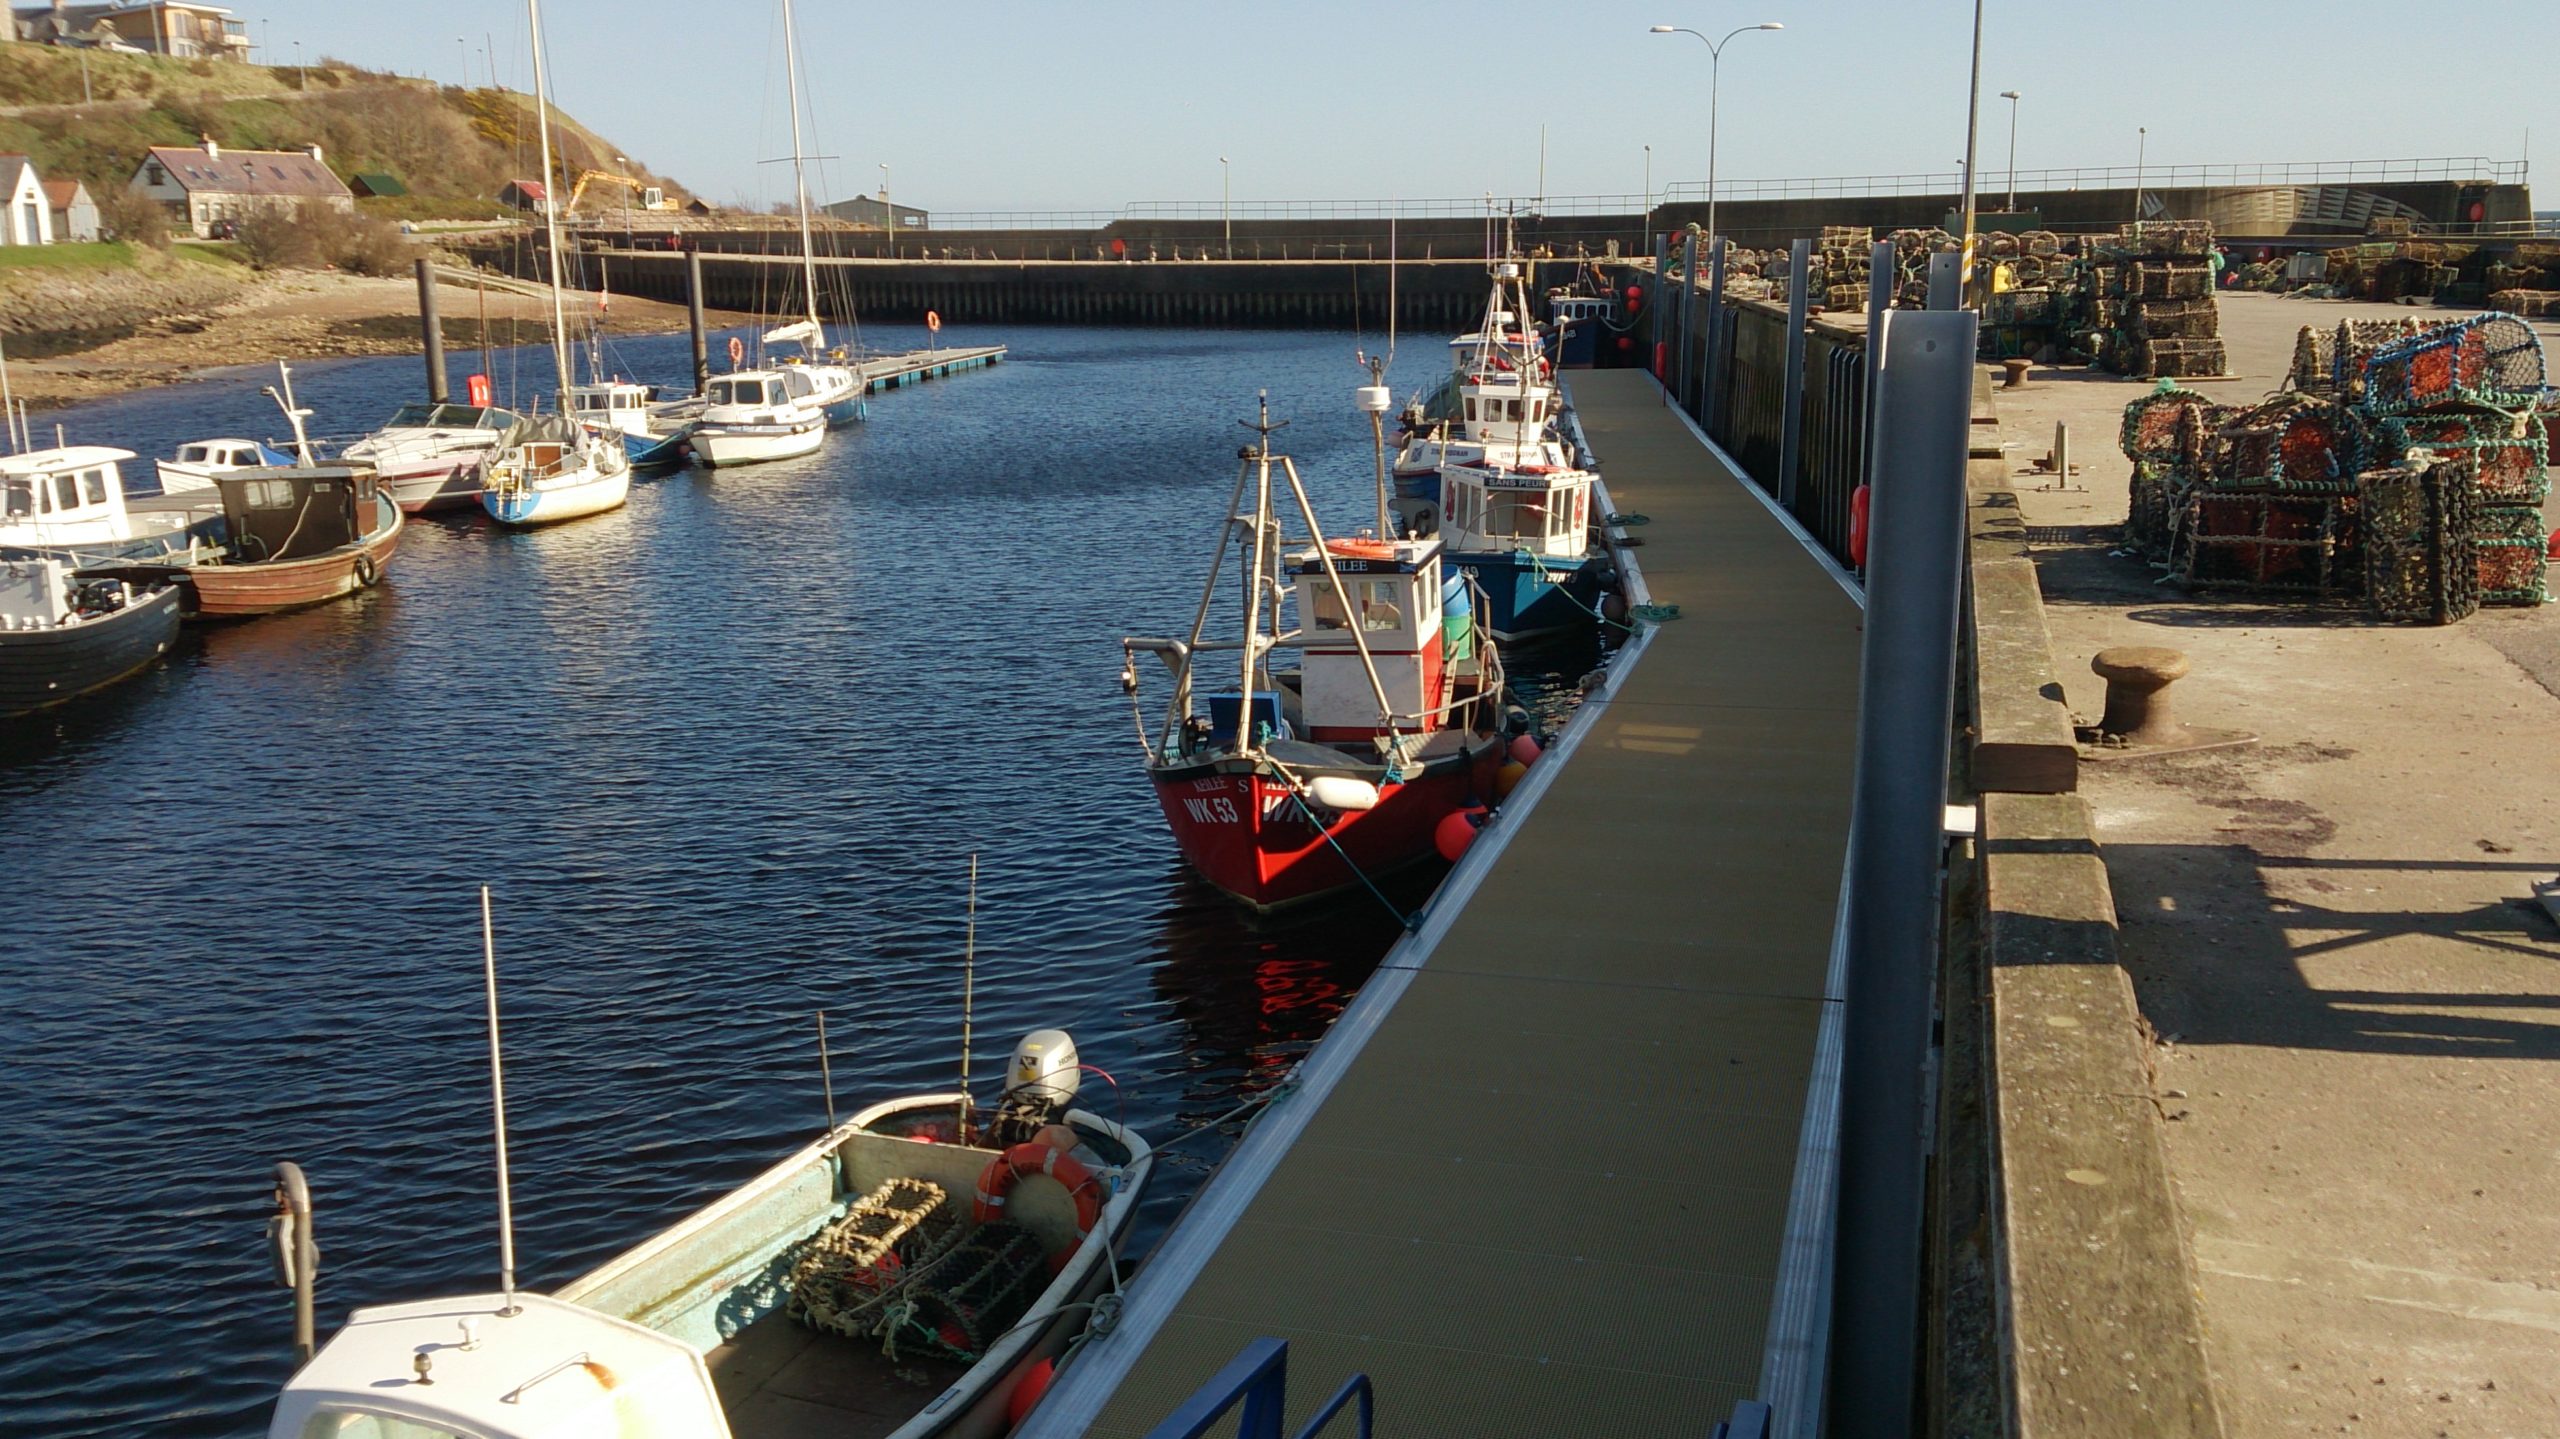 Pontoon curving alongside a quay wall with colourful fishing vessels moored